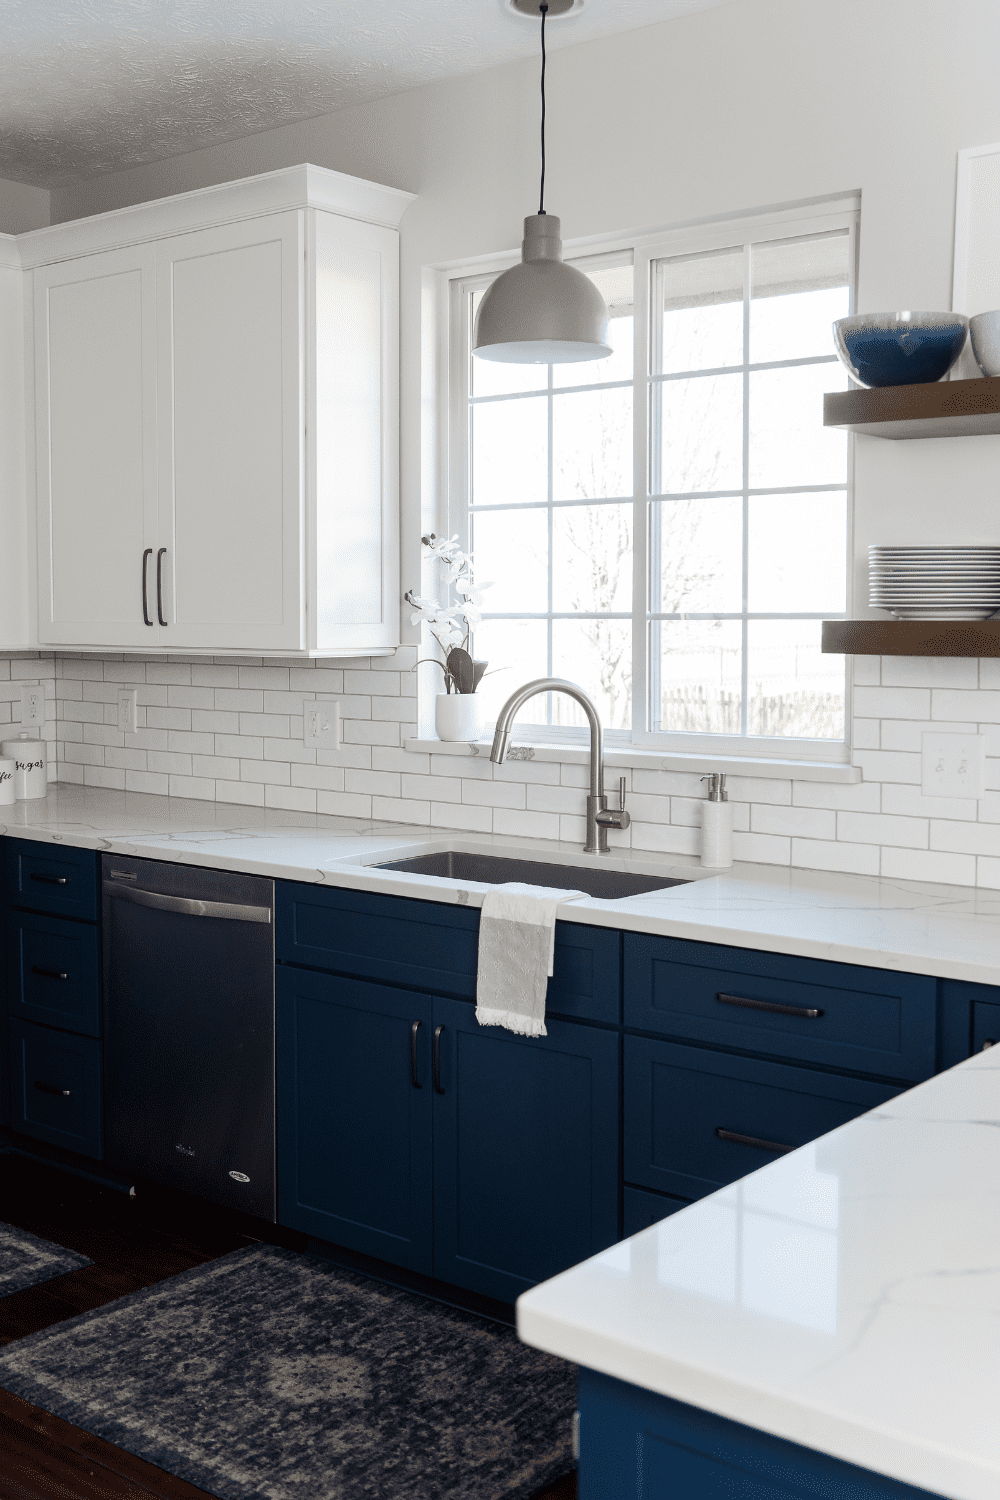 Nicholas Design Build | A kitchen with blue cabinets and white counter tops.